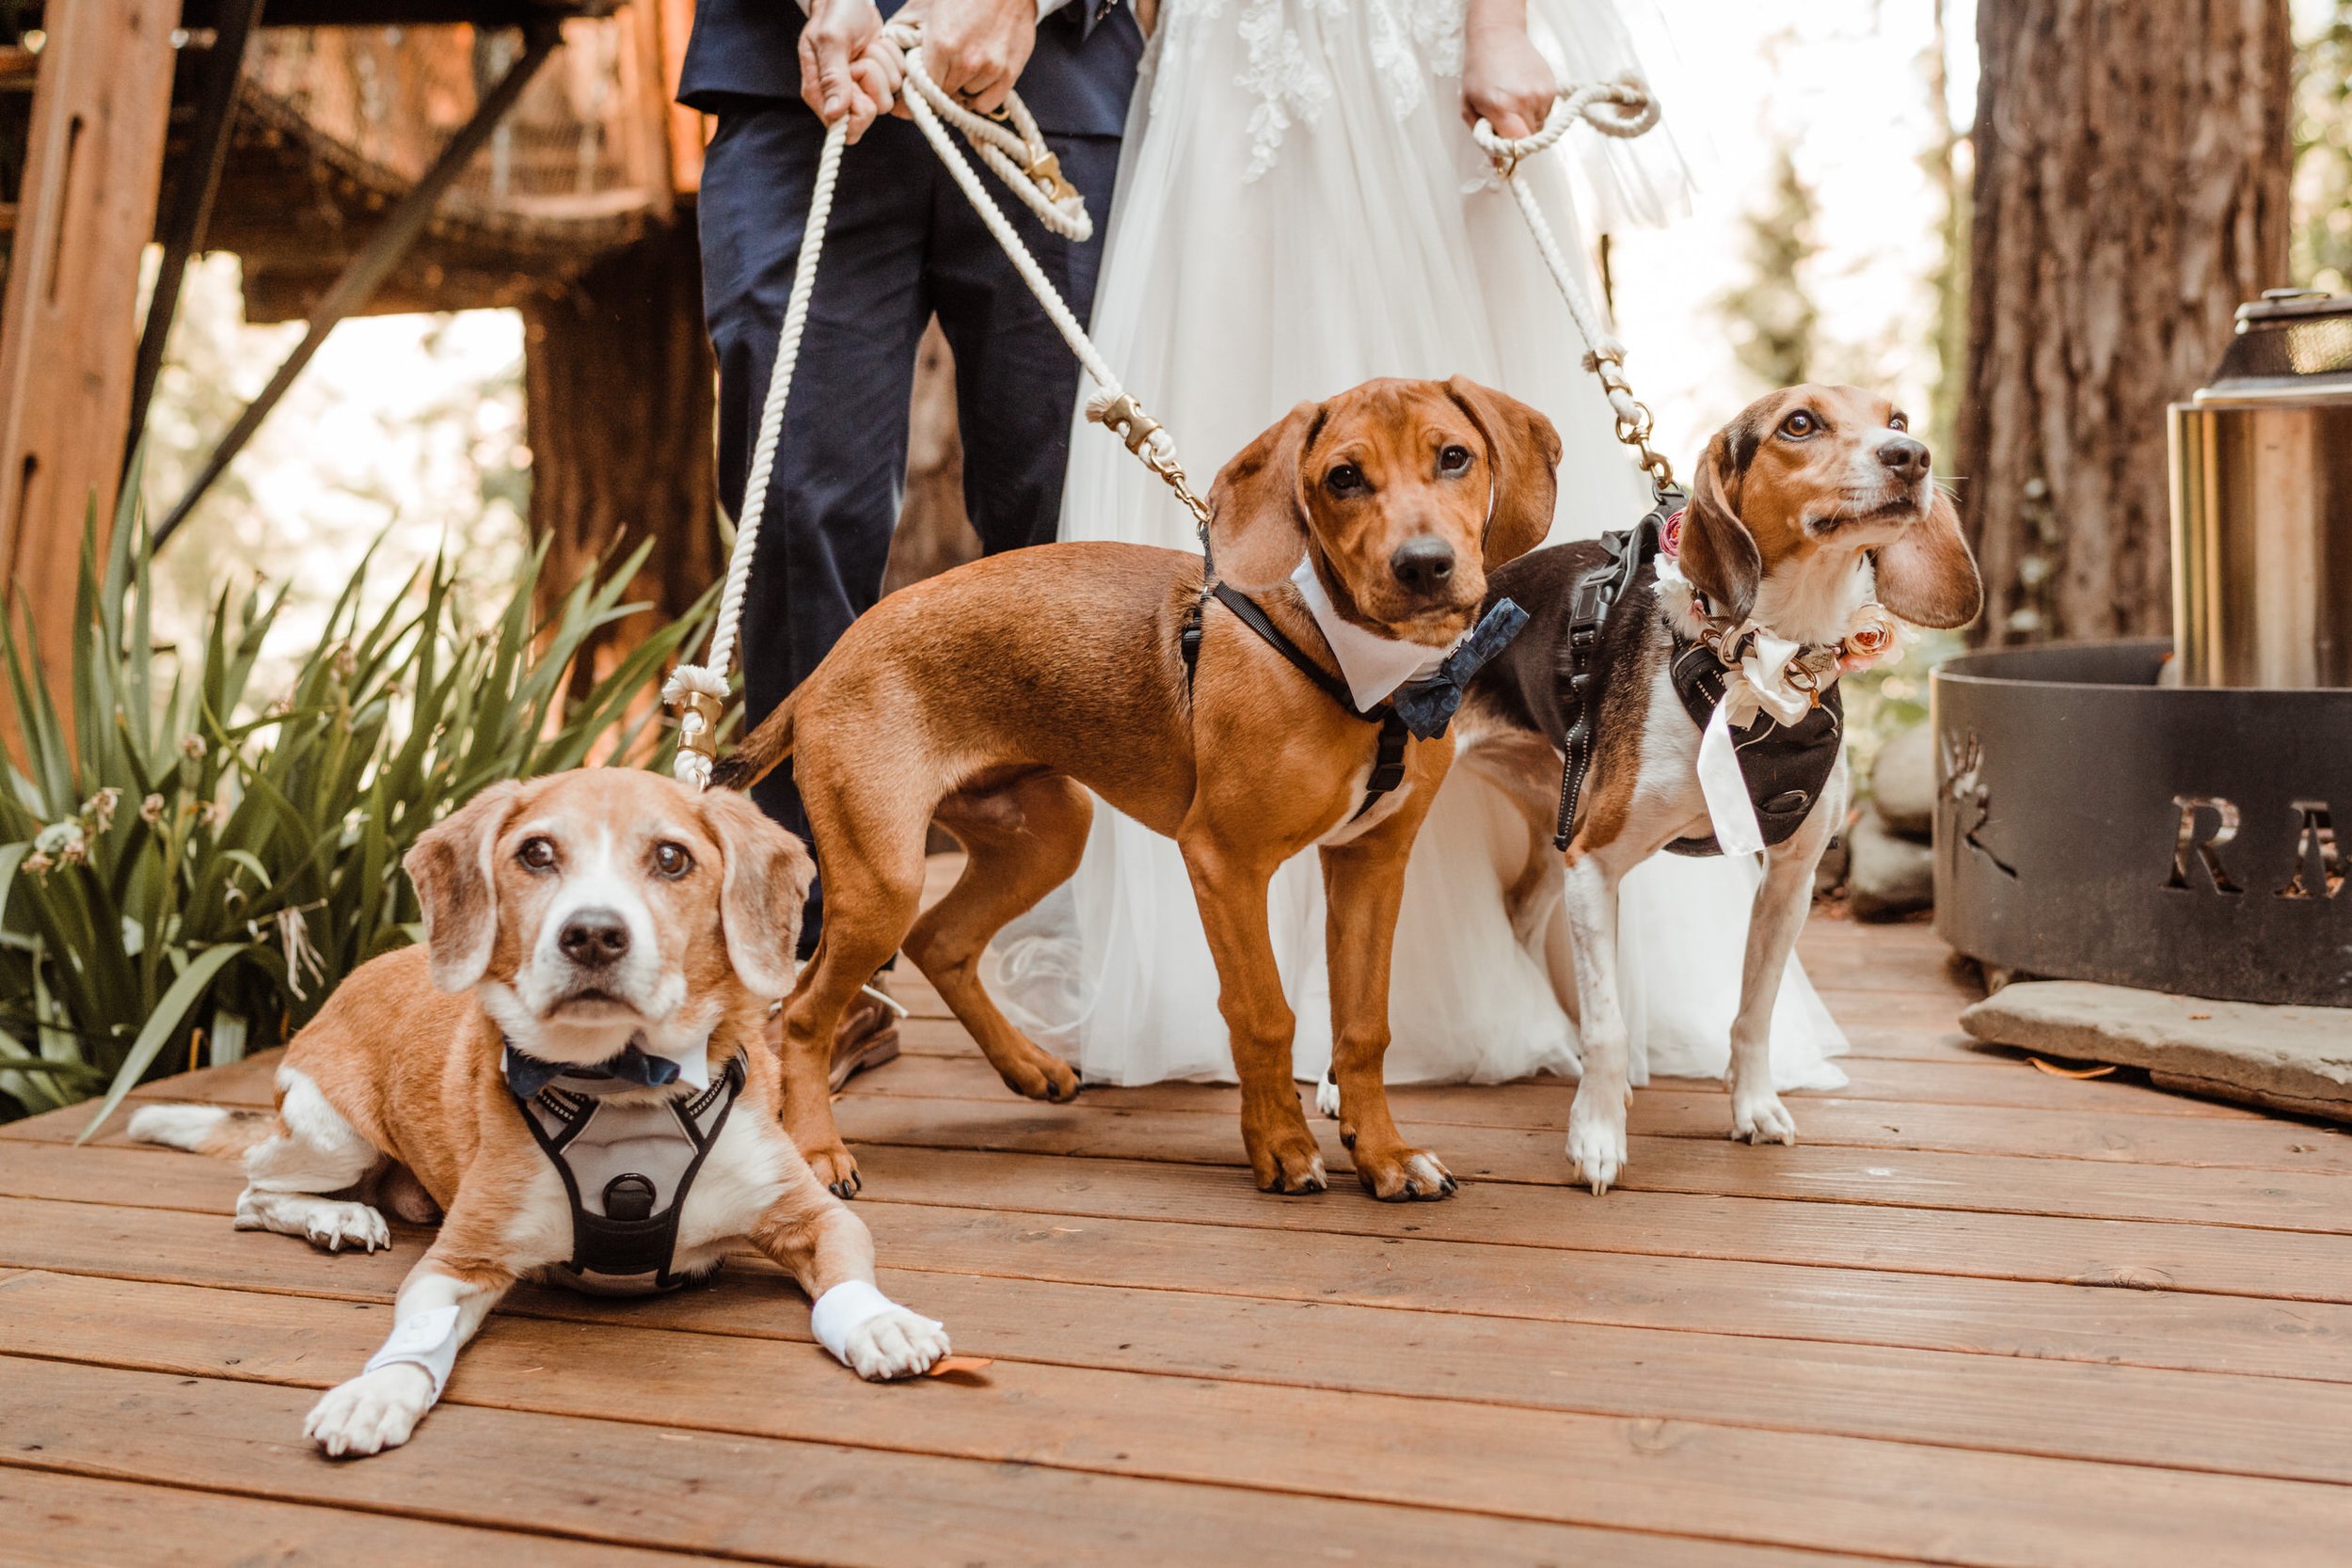 Wedding-in-the-Woods-Dogs-in-Tuxedos-and-Bowties-at-Ceremony (2).jpg